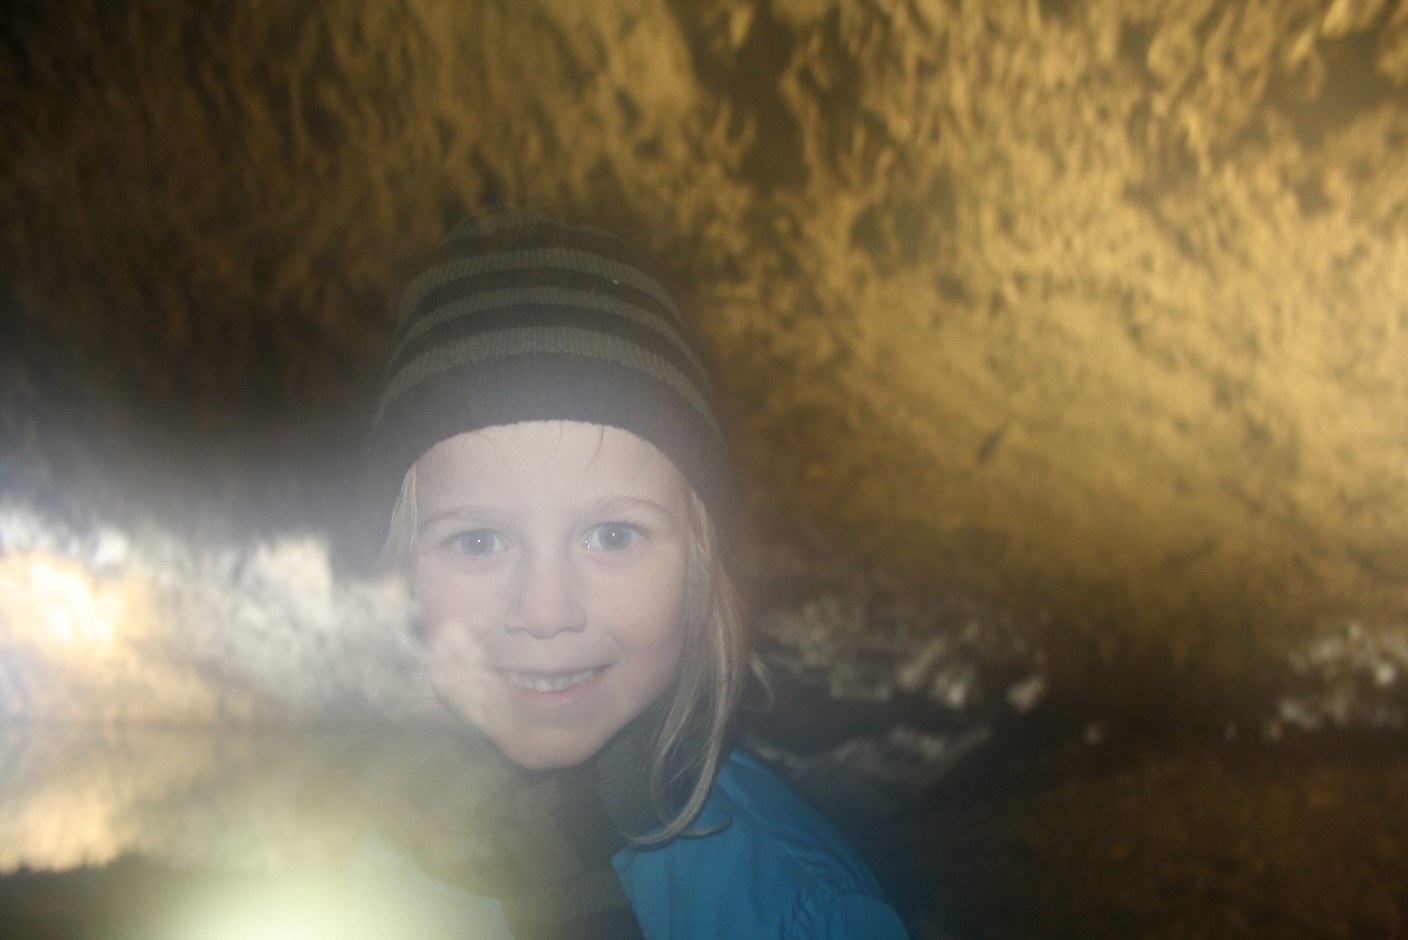 A bit of an ethereal experience was our visit in the cave - and, according to Silas, 